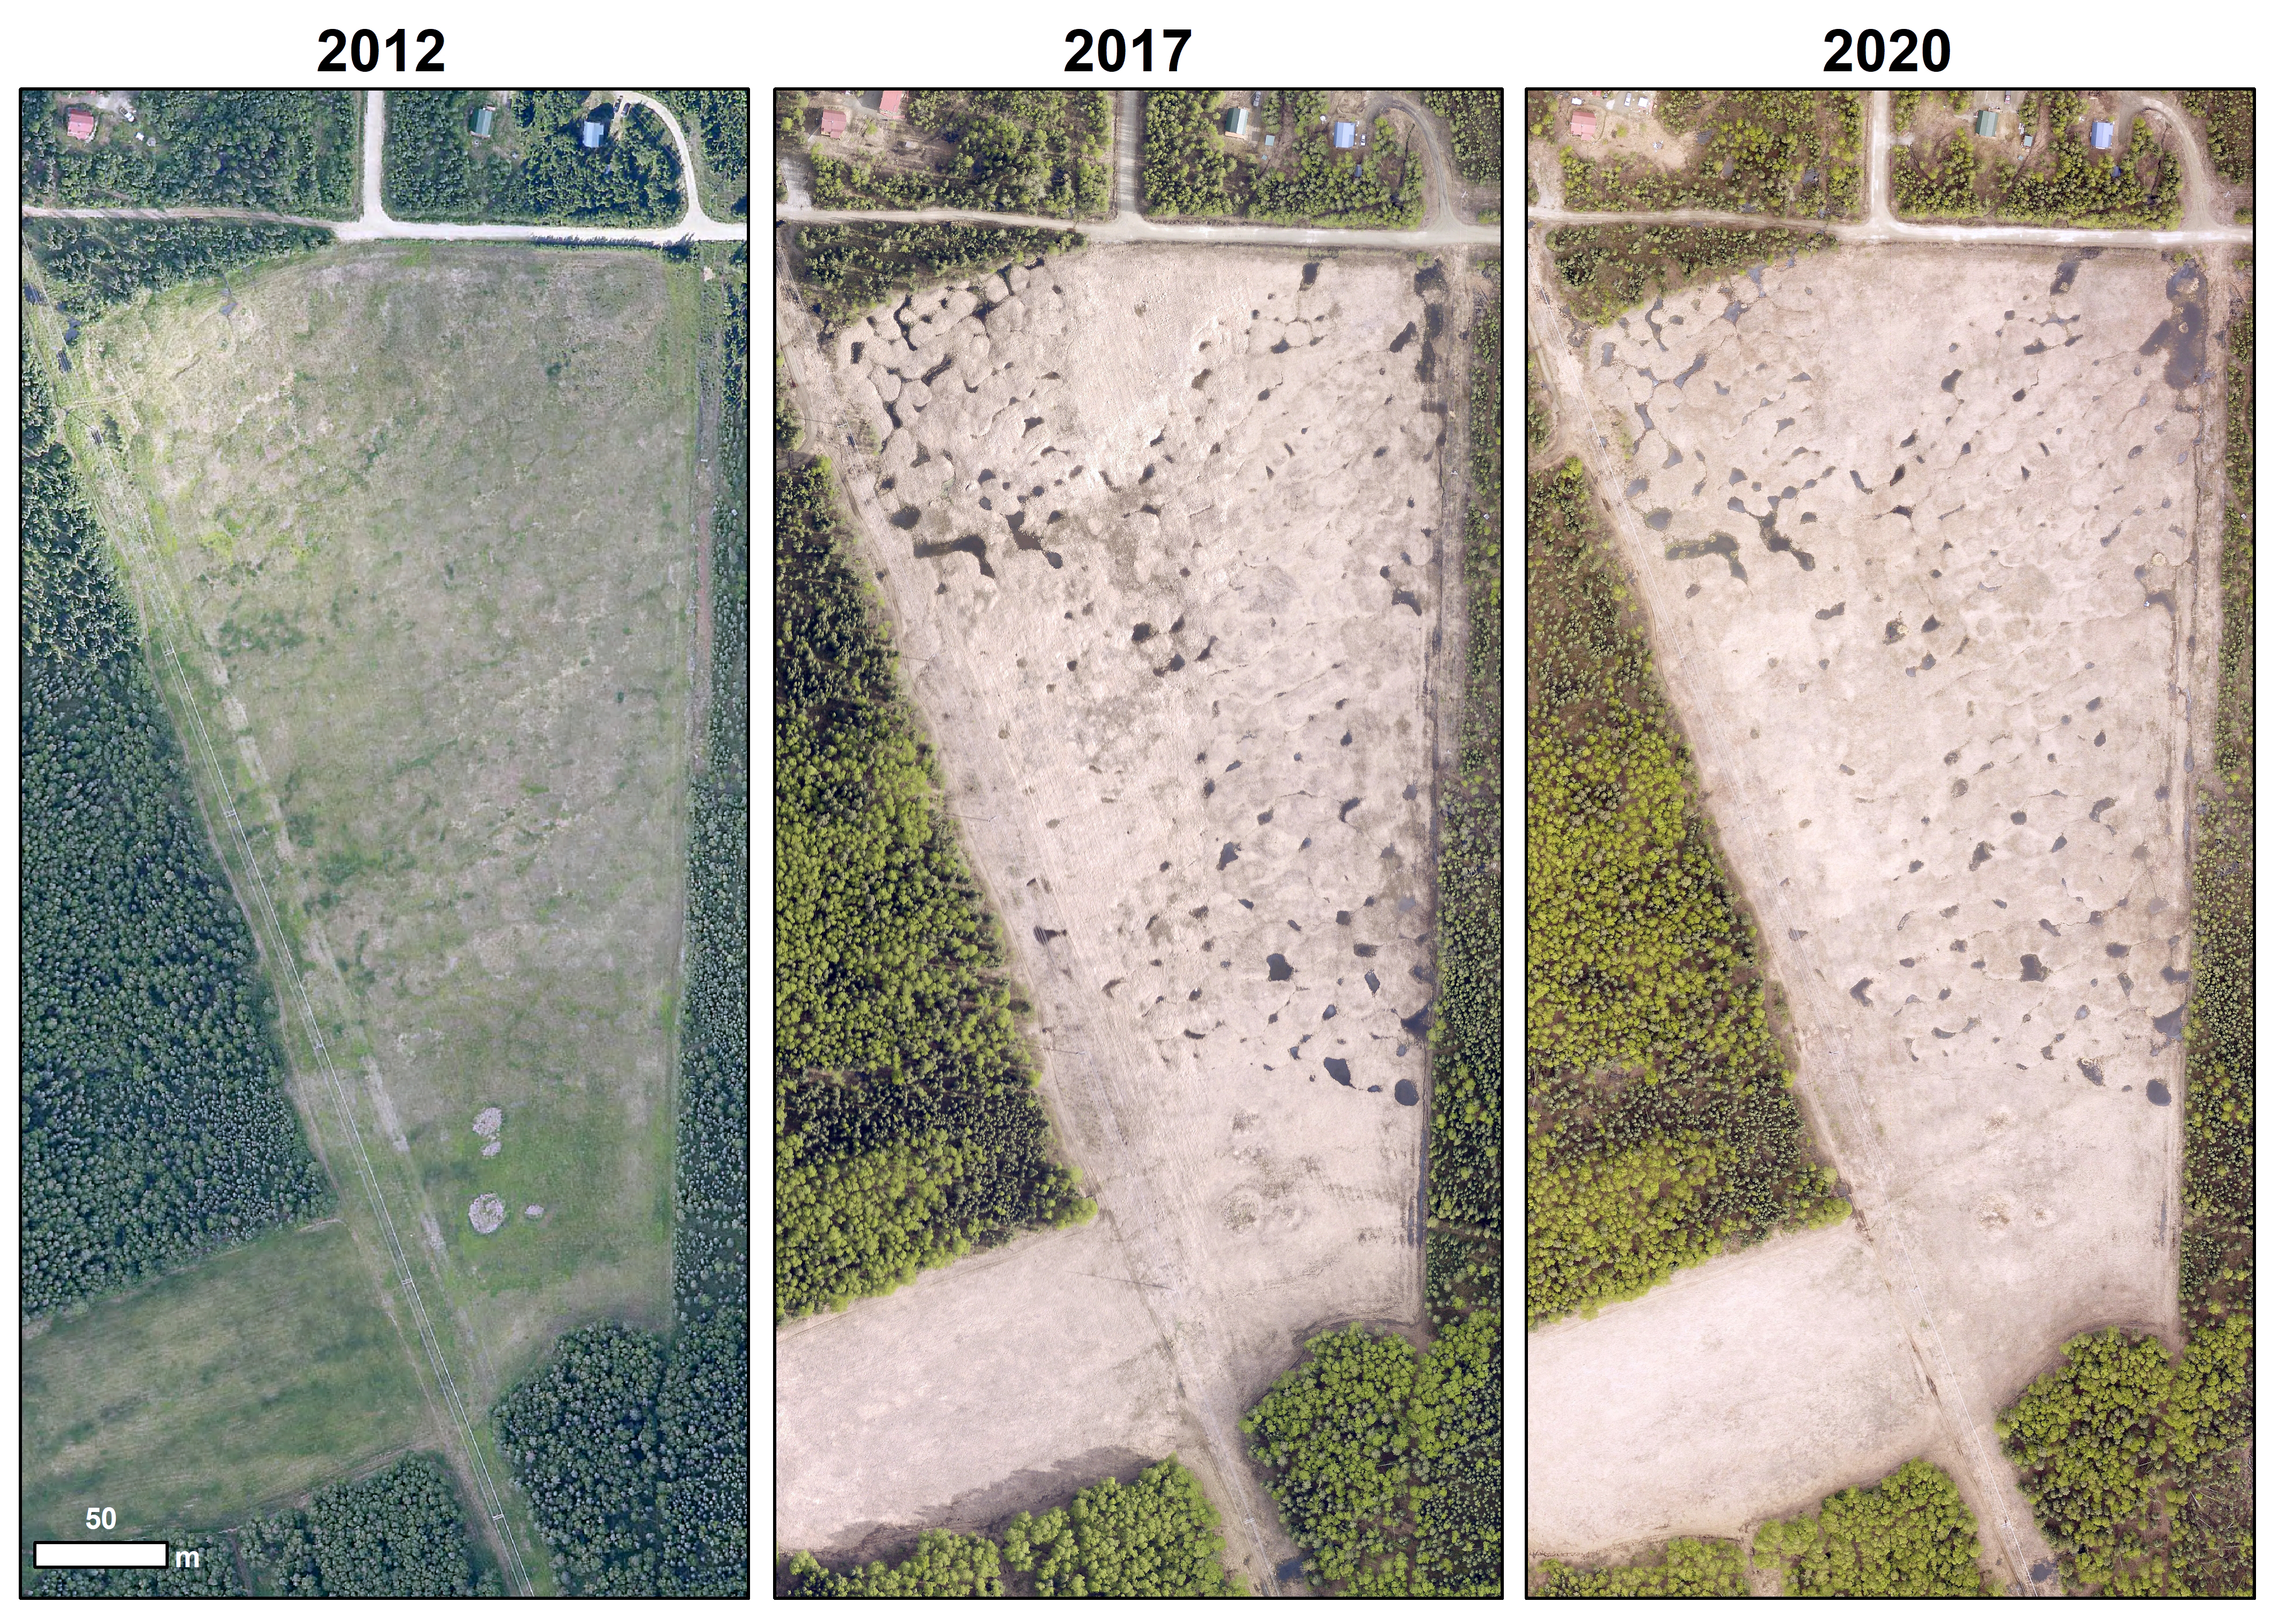 three panels showing aerial view of agricultural fields. From left to right, each panel has more dark area, which indicates ponds